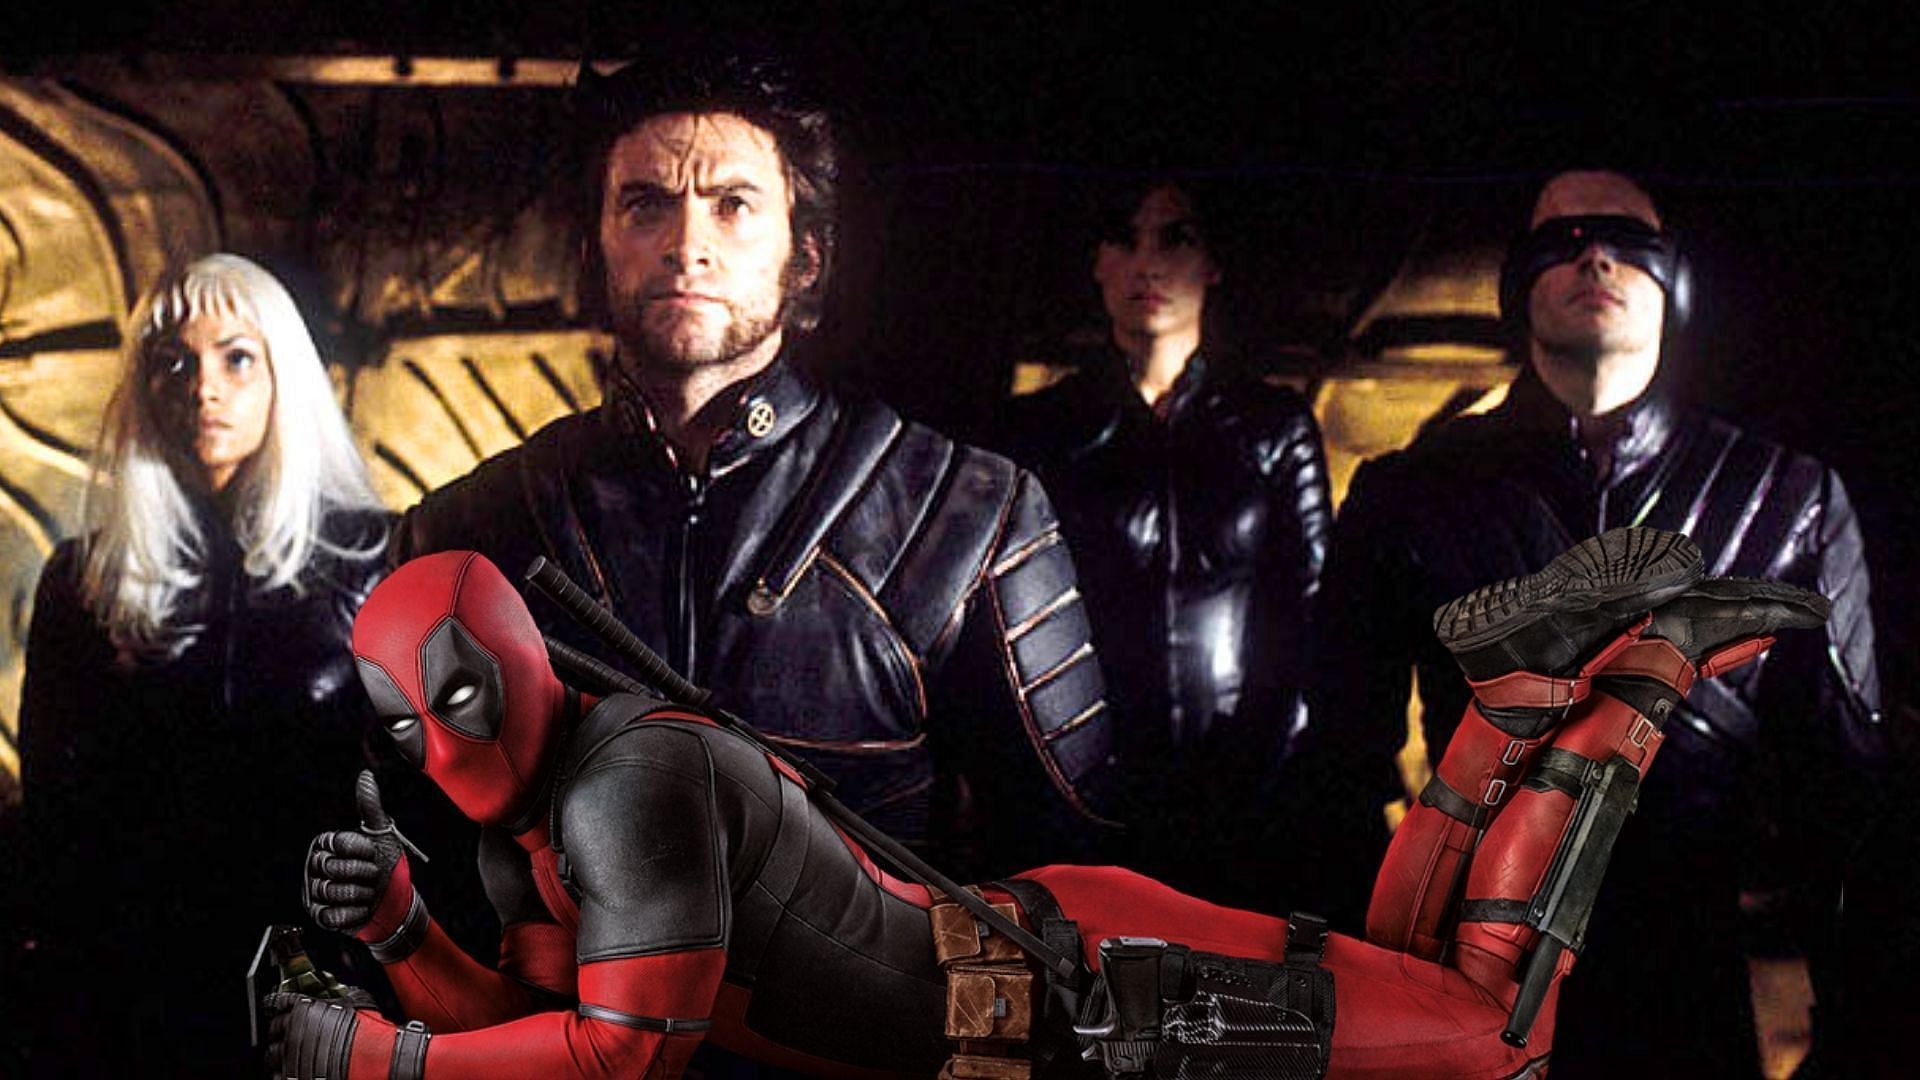 Ben Affleck To Join Another Multiverse As 'Daredevil' In Deadpool 3 After  The Flash? Netizens Say He Just Plays Versions Of His Old Characters